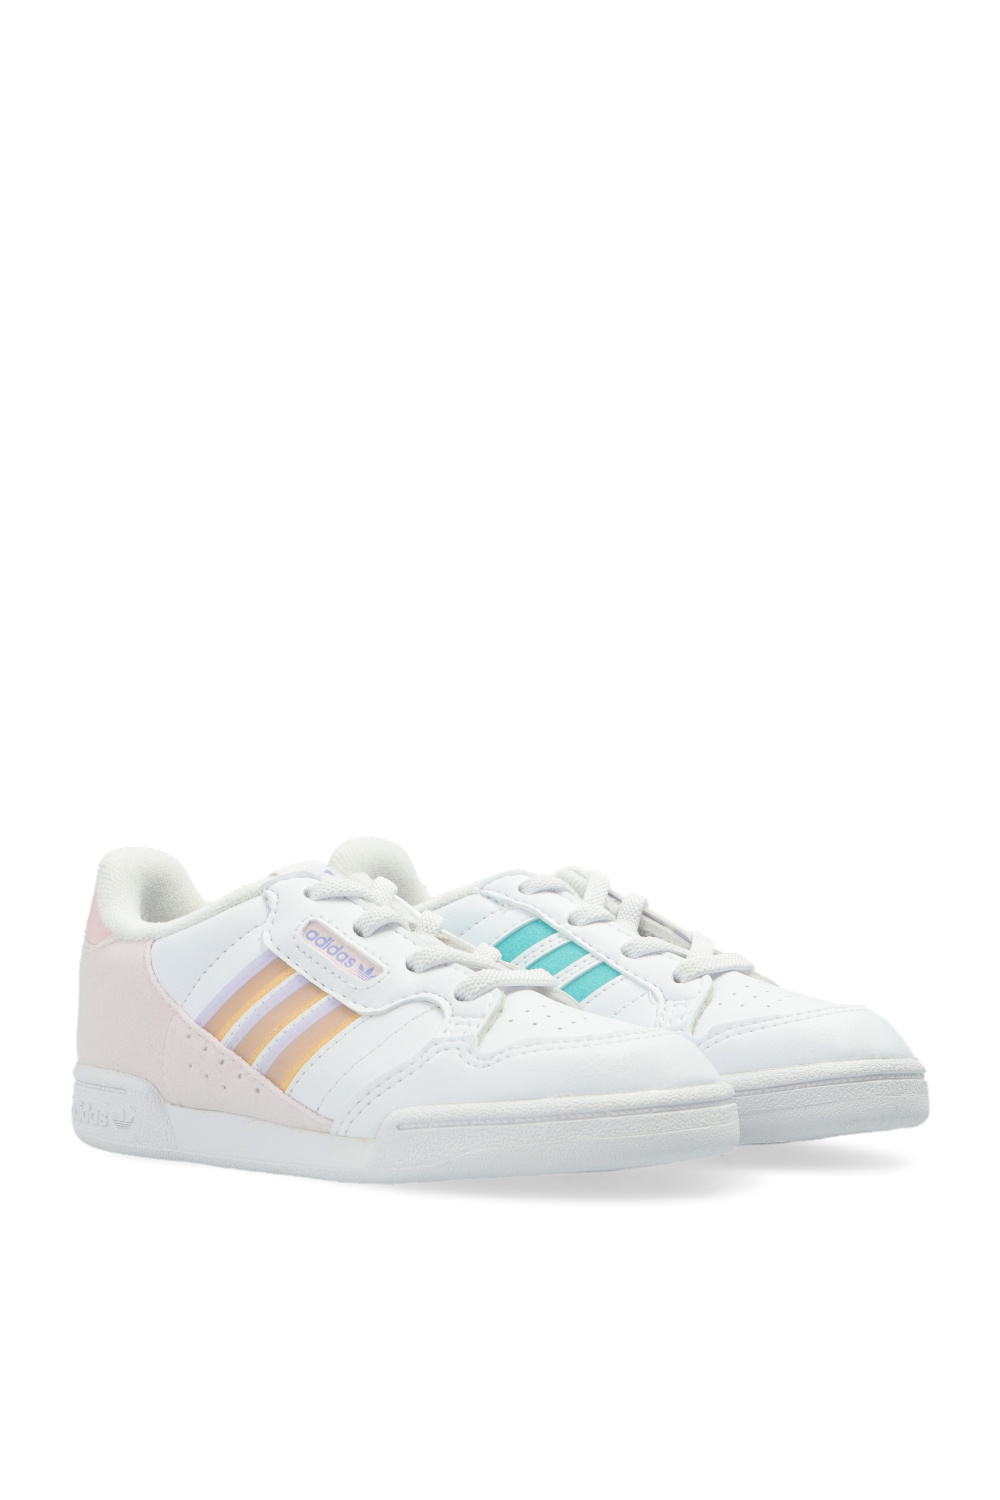 adidas bord Kids ‘Continental 80 Stripes’ sneakers